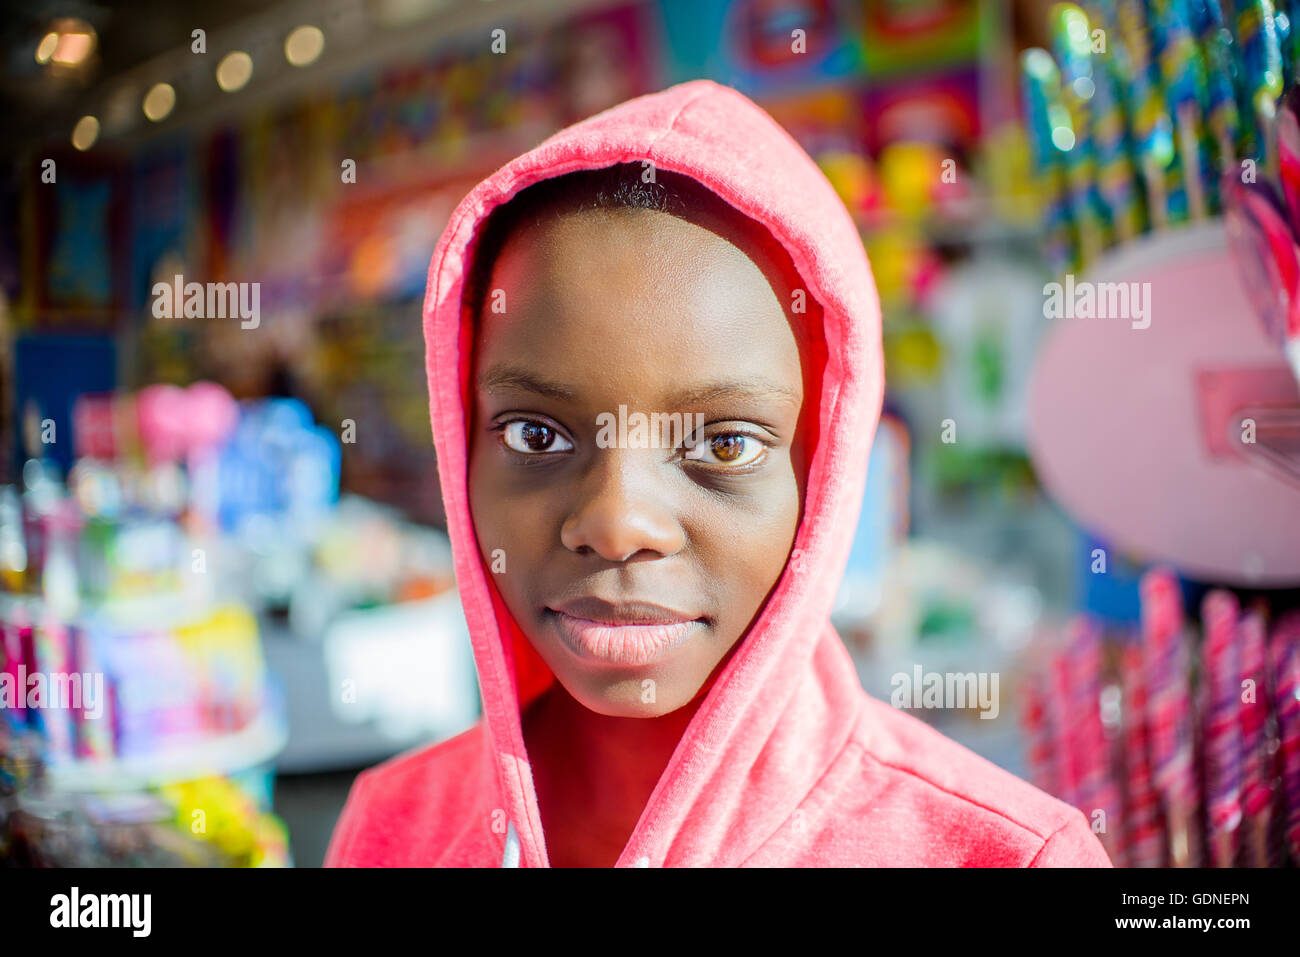 Portrait of teenage girl in front of candy stall wearing pink hoody, Brooklyn, USA Stock Photo